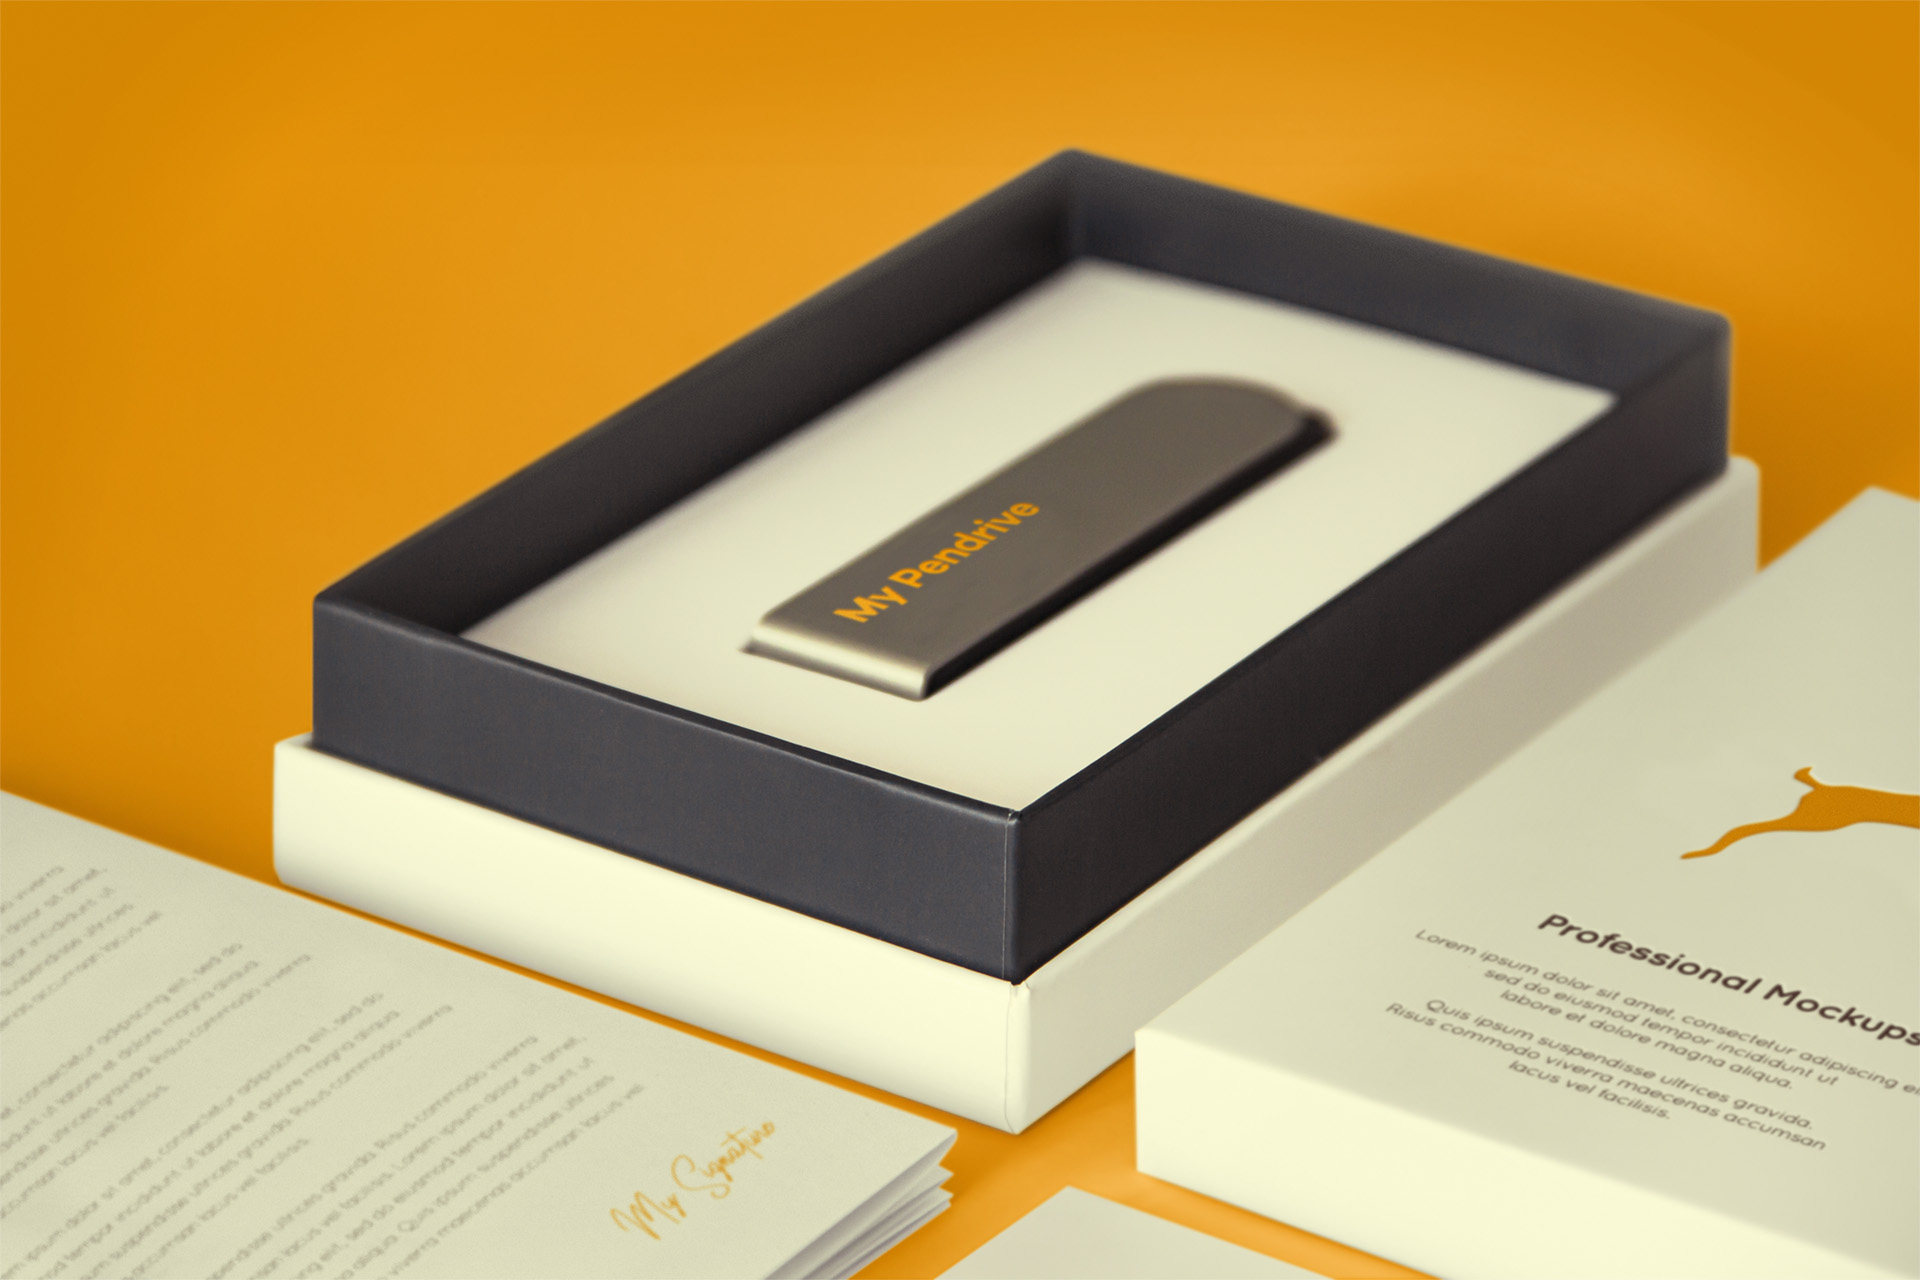 Download 5 Product Box And Pendrive Mockups For Adobe Photoshop Mindzlance